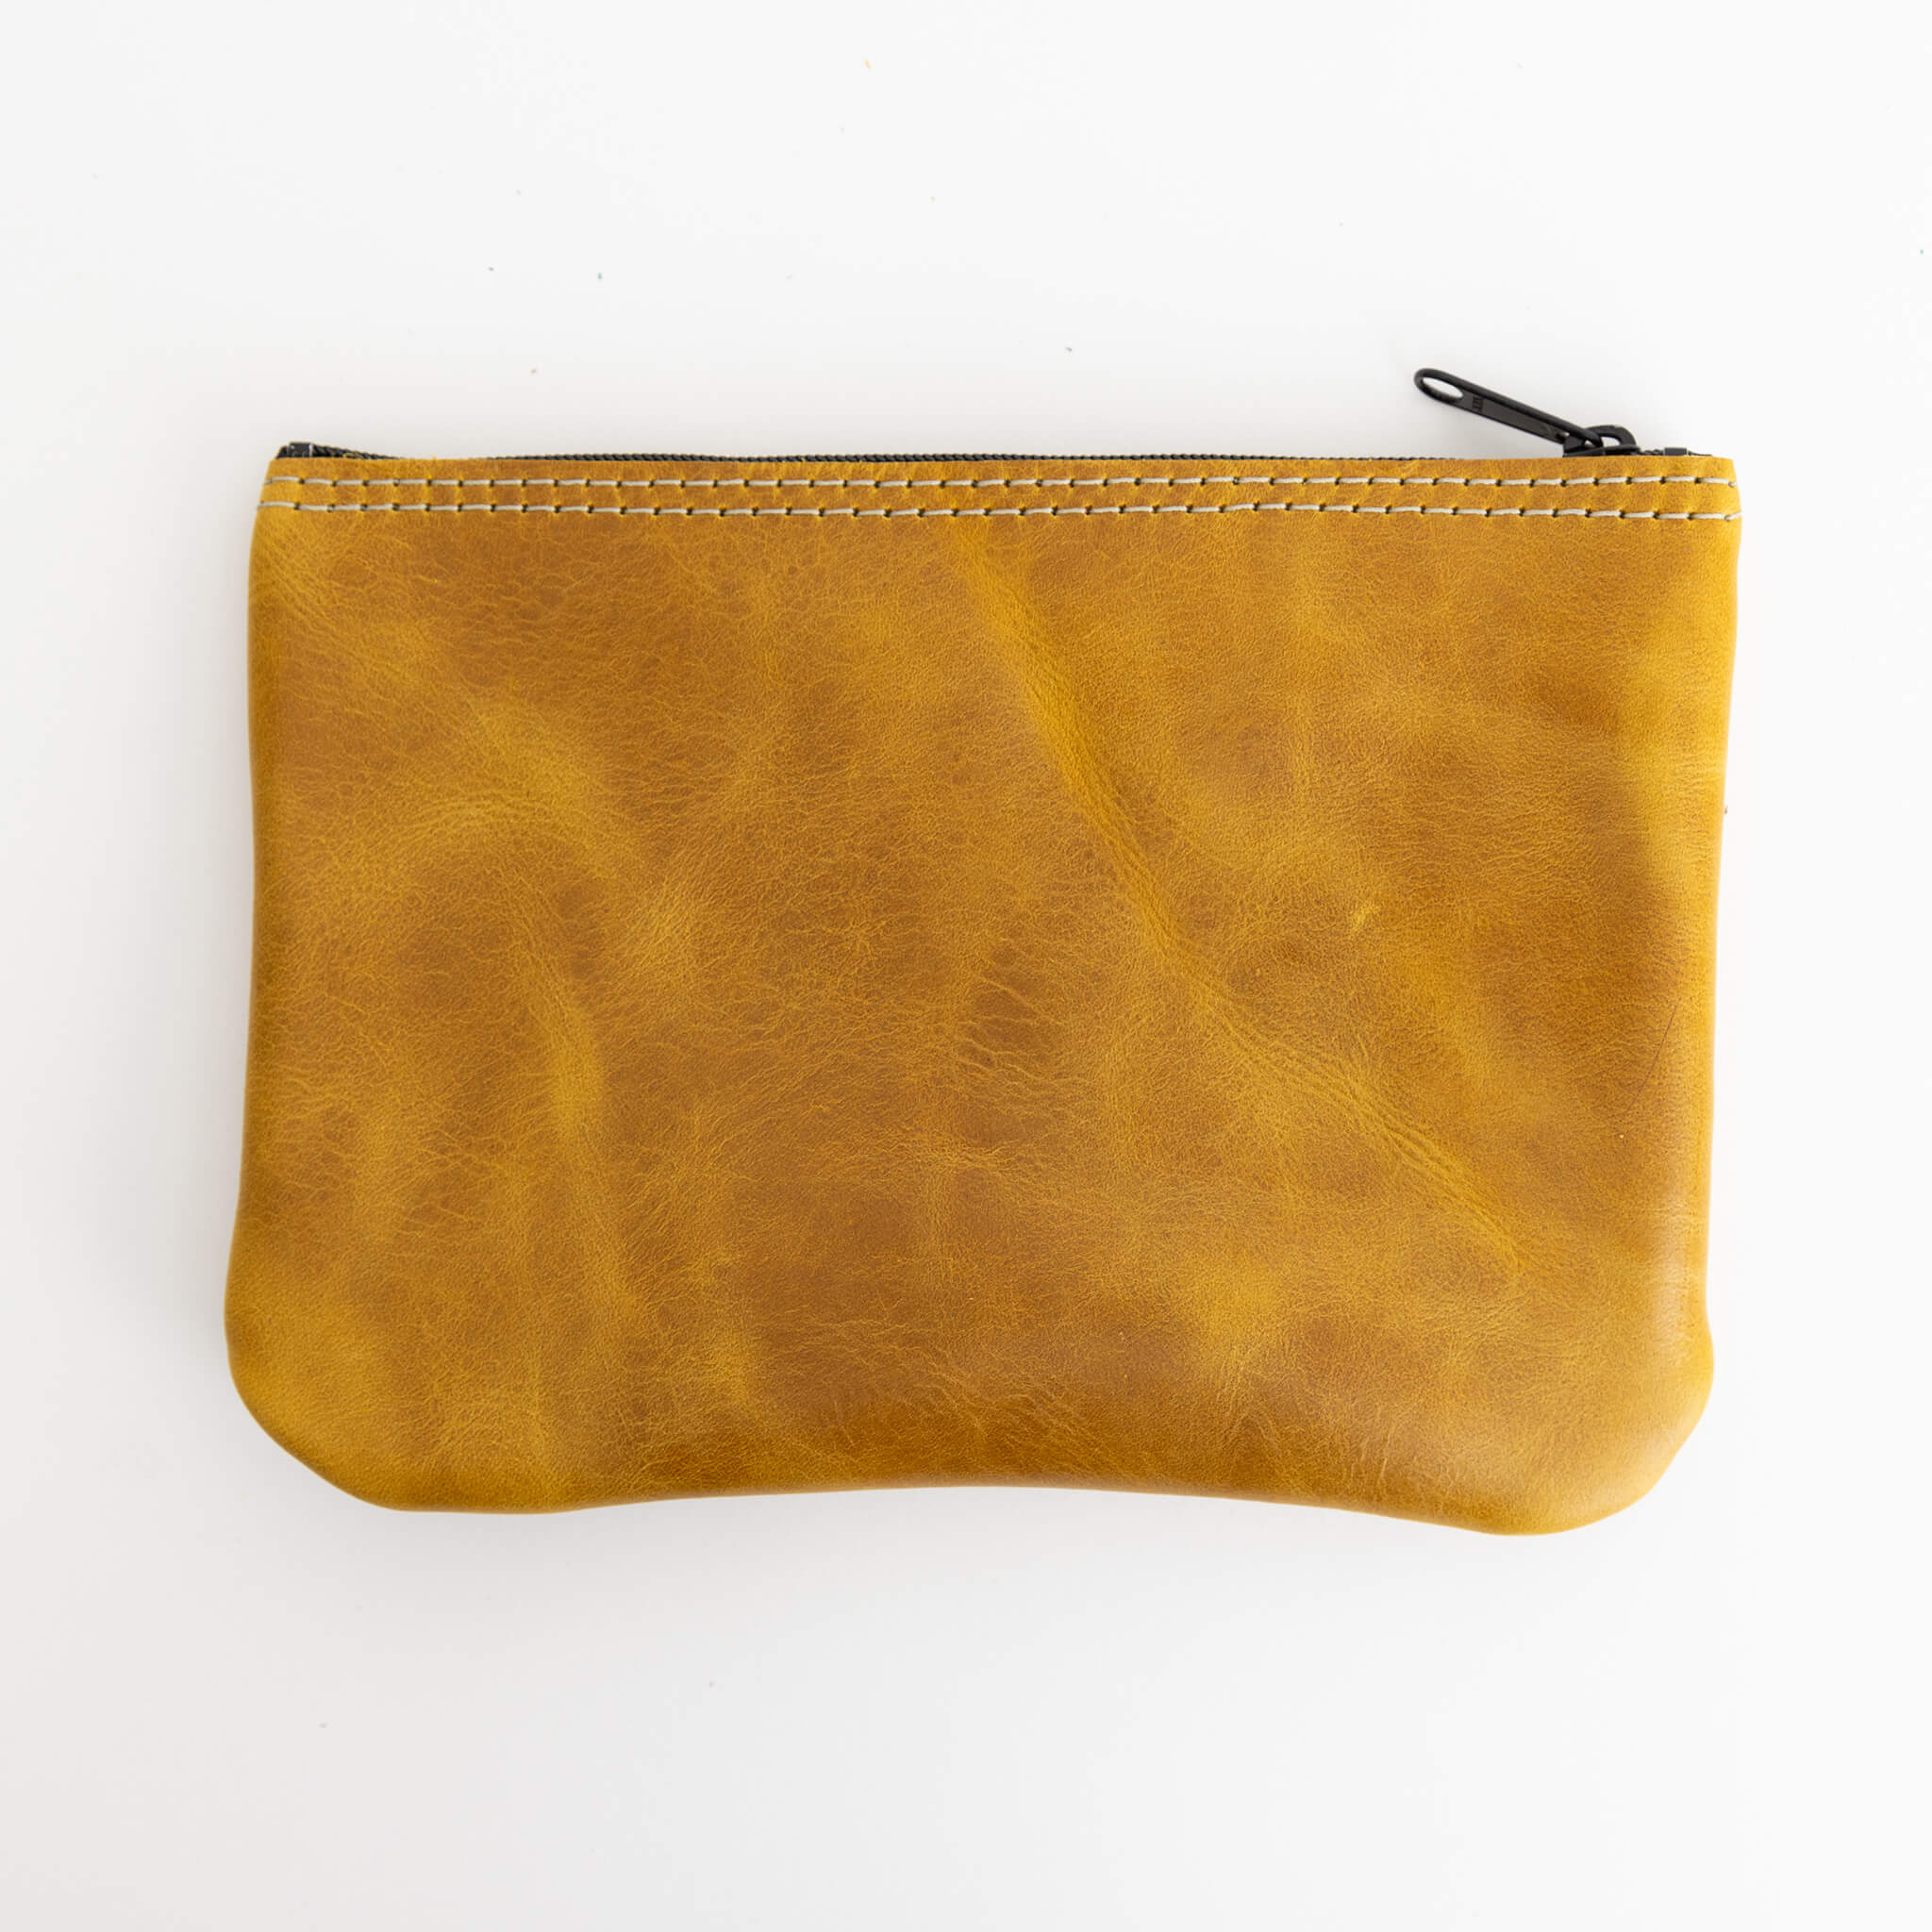 perfect pouch unisex zipper bag - handmade leather - honey front view